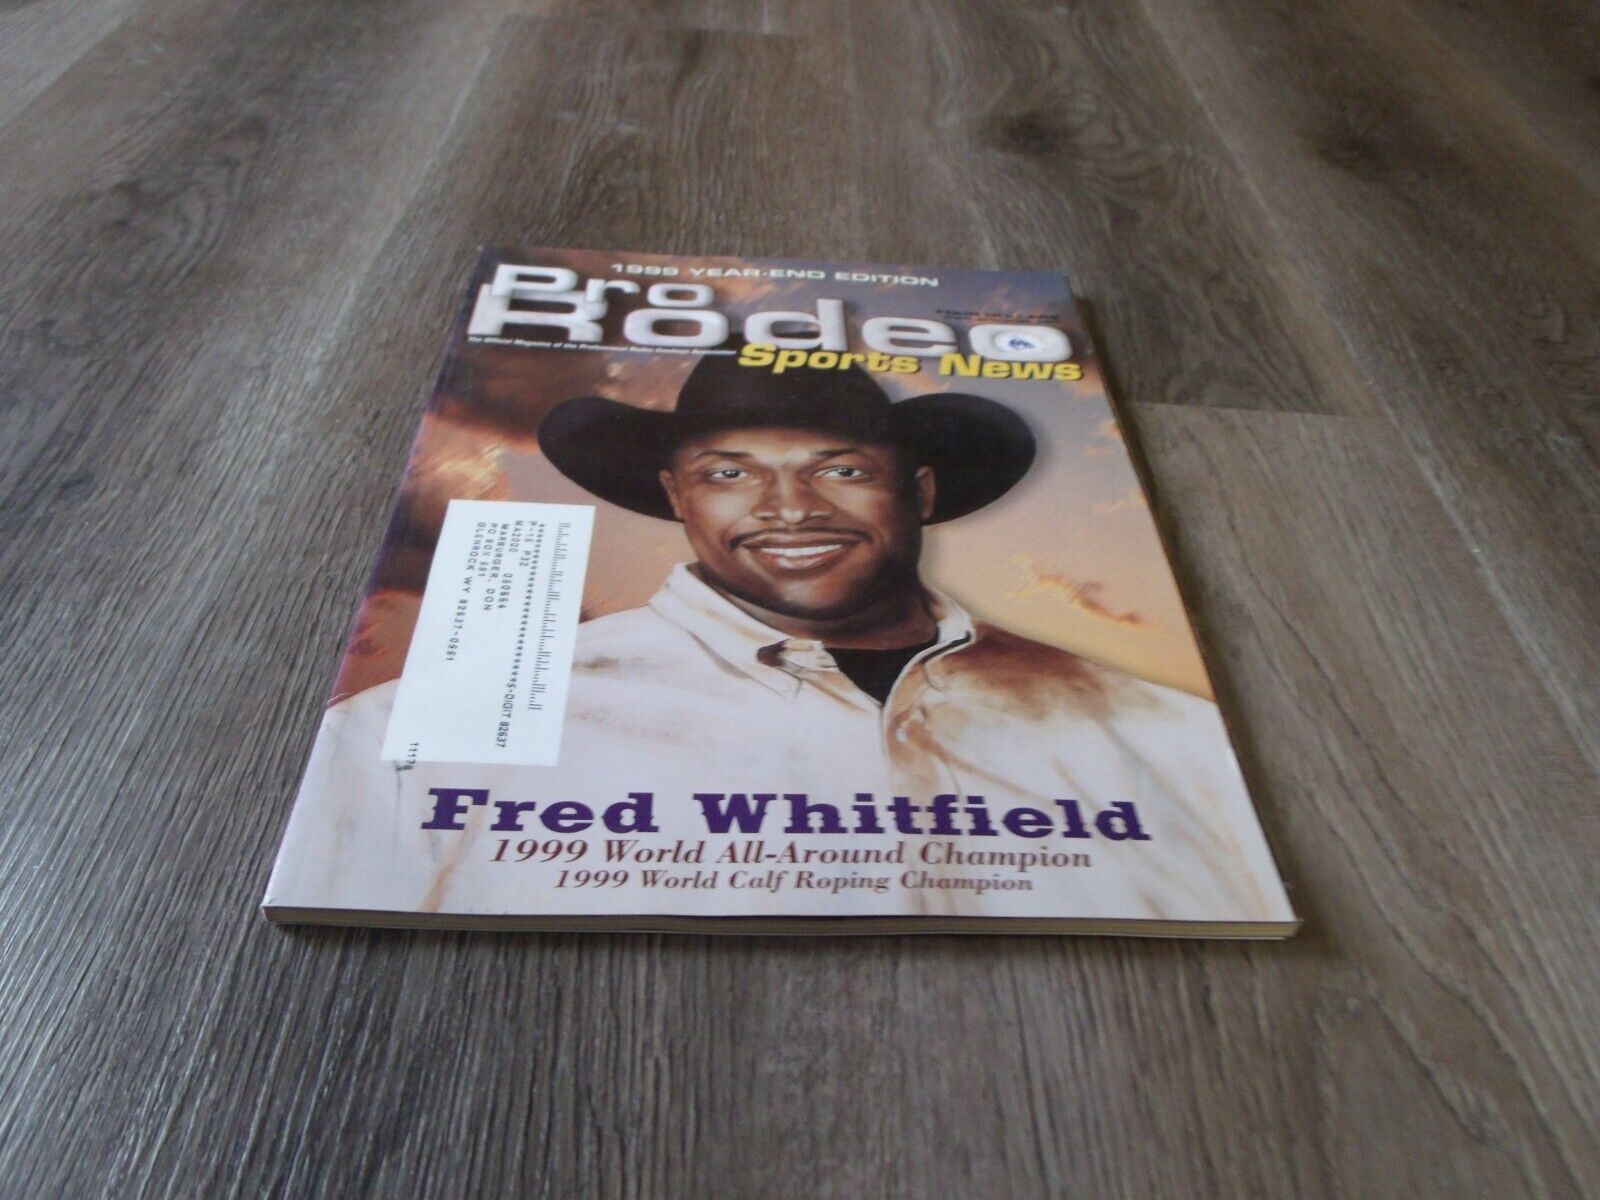 1999 PRO RODEO SPORTS NEWS YEAR END EDITION PRCA NFR